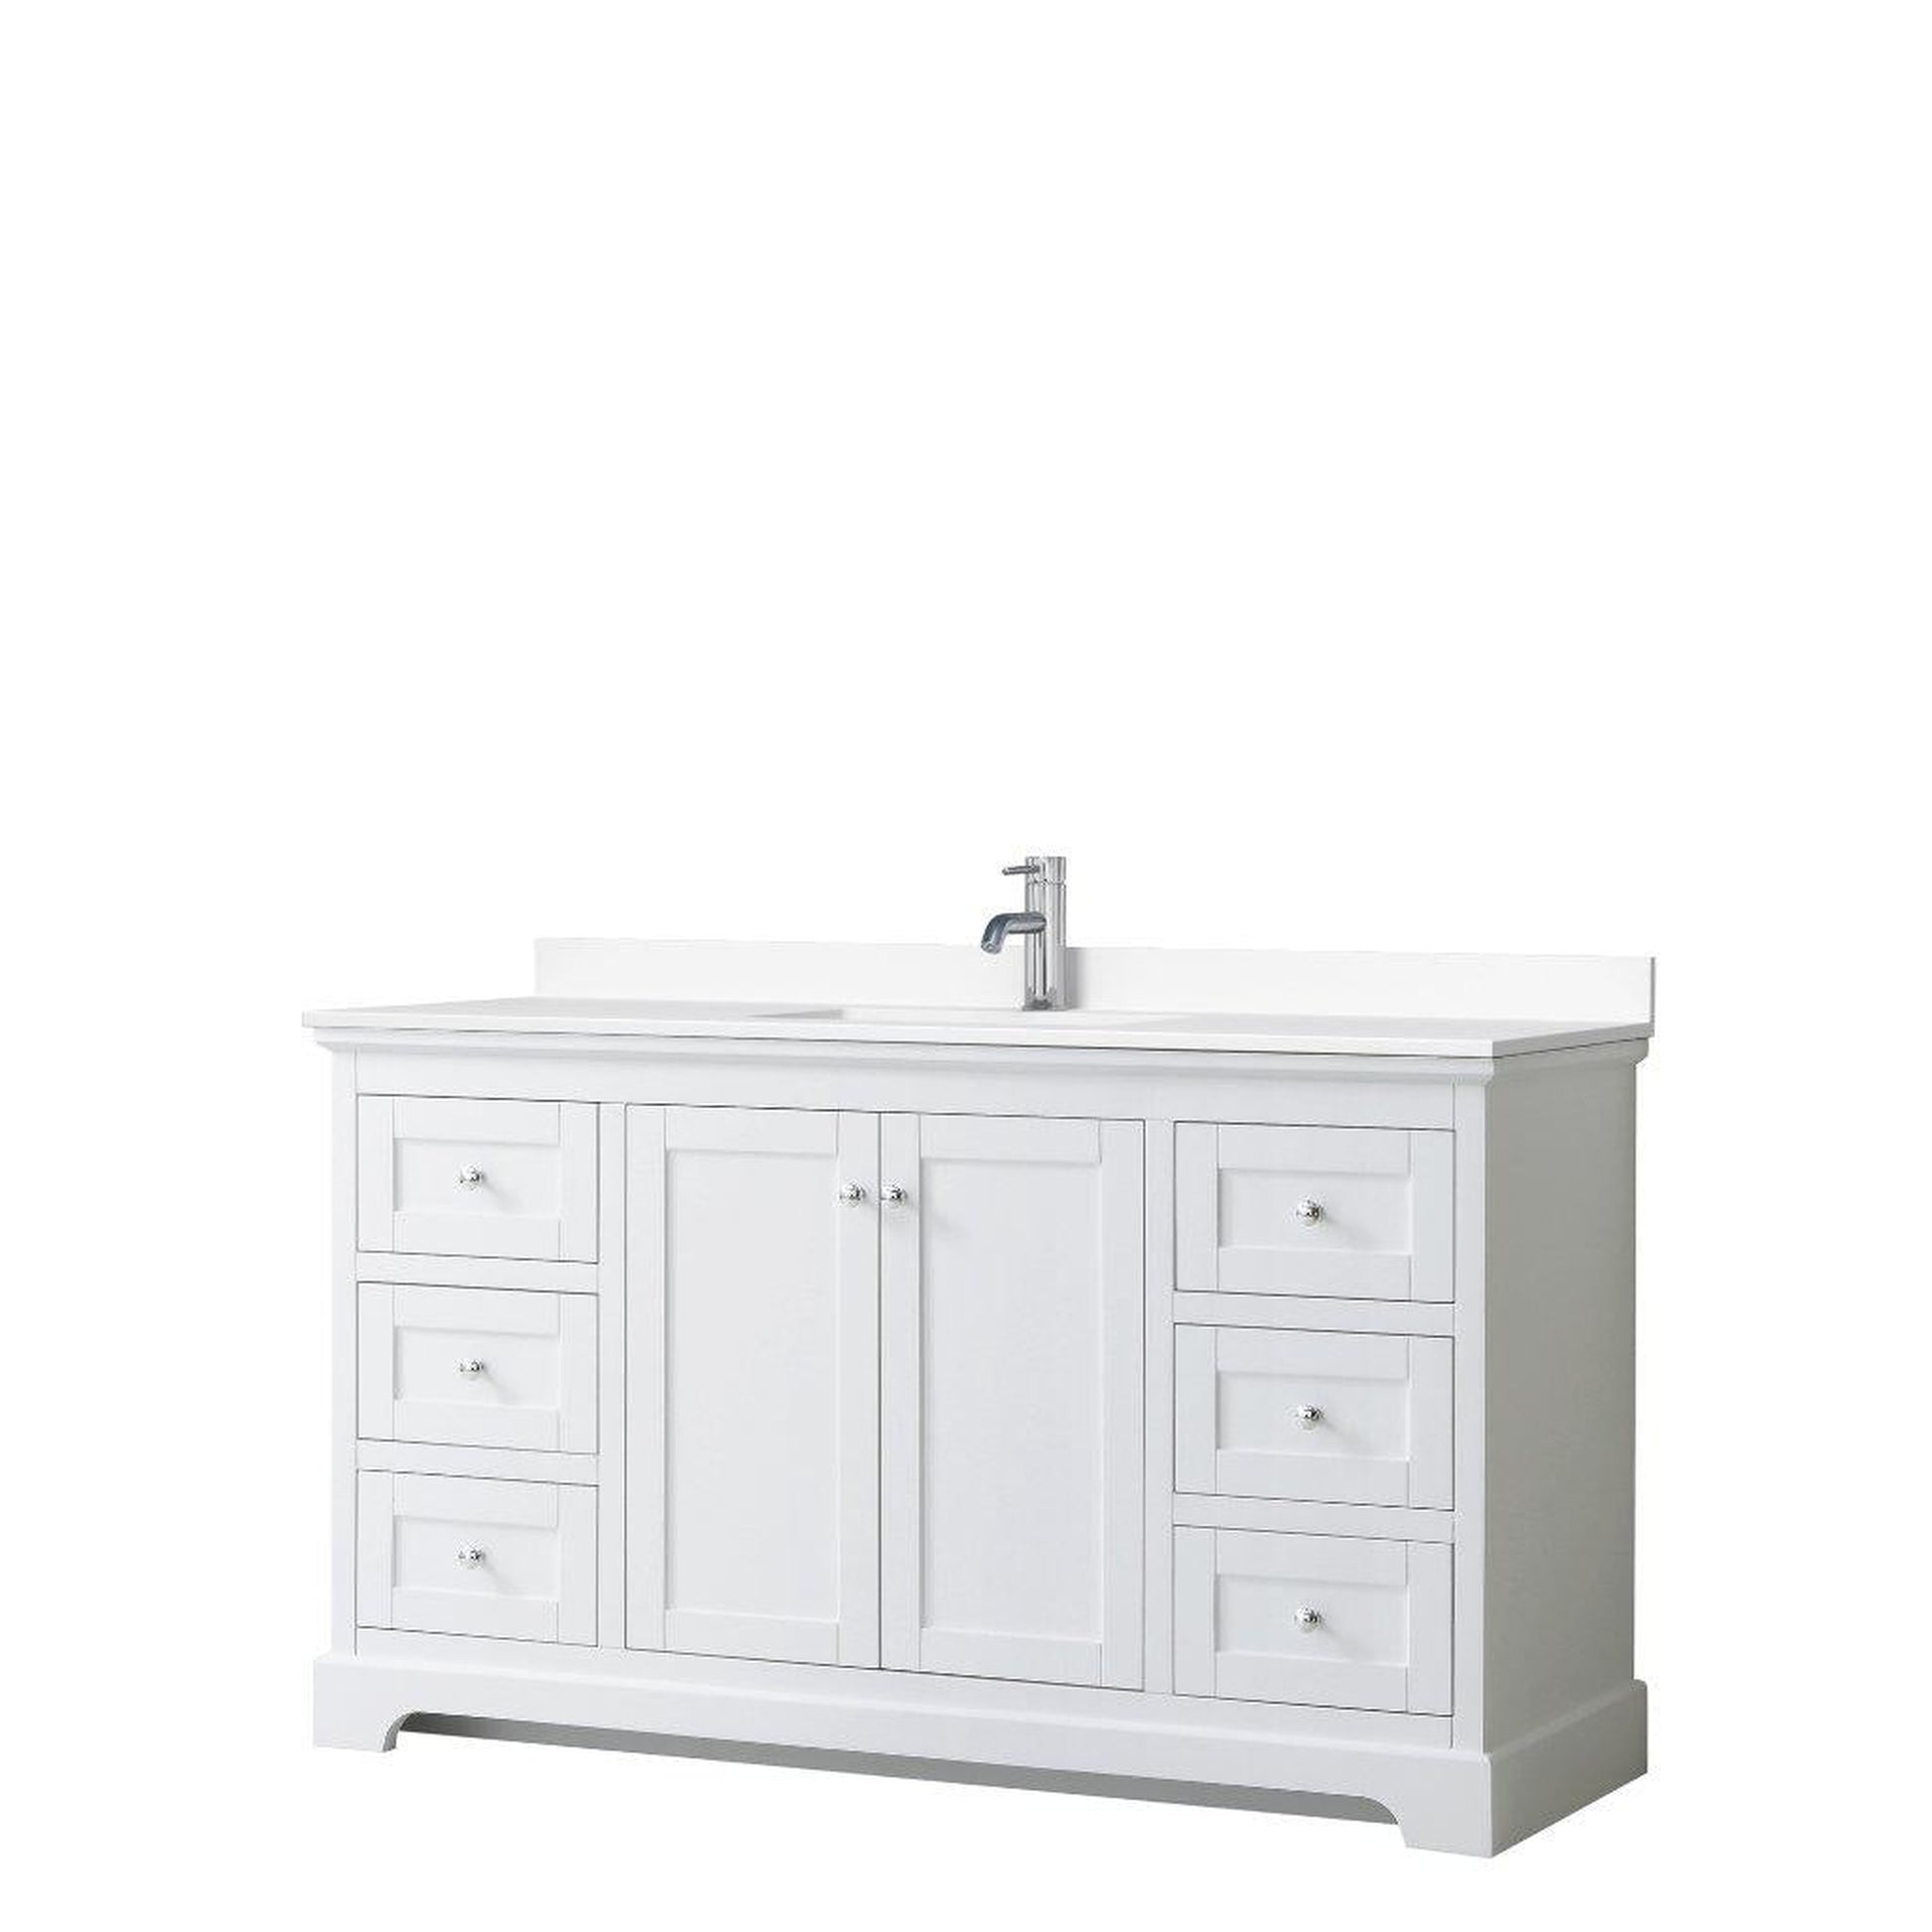 Wyndham Collection Avery 60" White Single Bathroom Vanity, White Cultured Marble Countertop With 1-Hole Faucet, Square Sink, Polished Chrome Trims